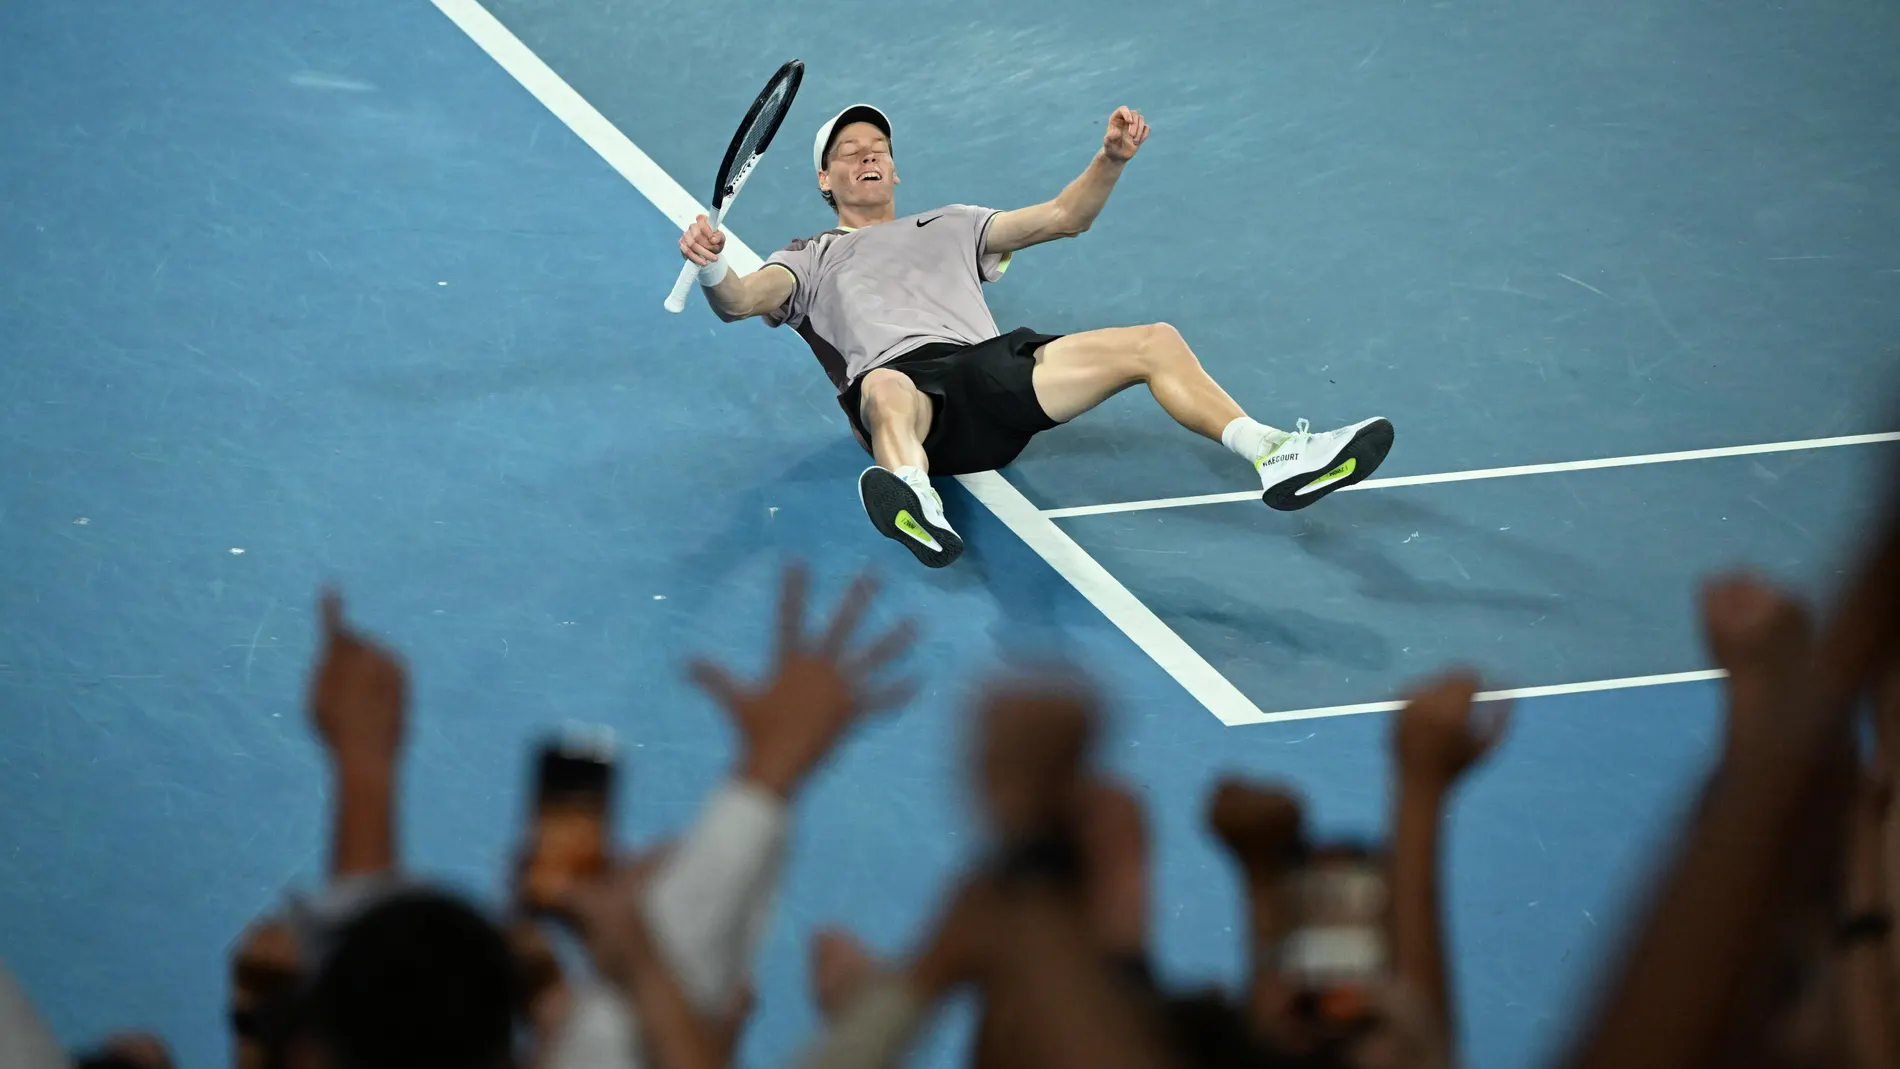 Melbourne (Australia), 28/01/2024.- Jannik Sinner of Italy celebrates after winning the Men'Äôs Singles final against Daniil Medvedev of Russia on Day 15 of the Australian Open tennis tournament in Melbourne, Australia, 28 January 2024. (Tenis, Italia, Rusia) EFE/EPA/JAMES ROSS AUSTRALIA AND NEW ZEALAND OUT 